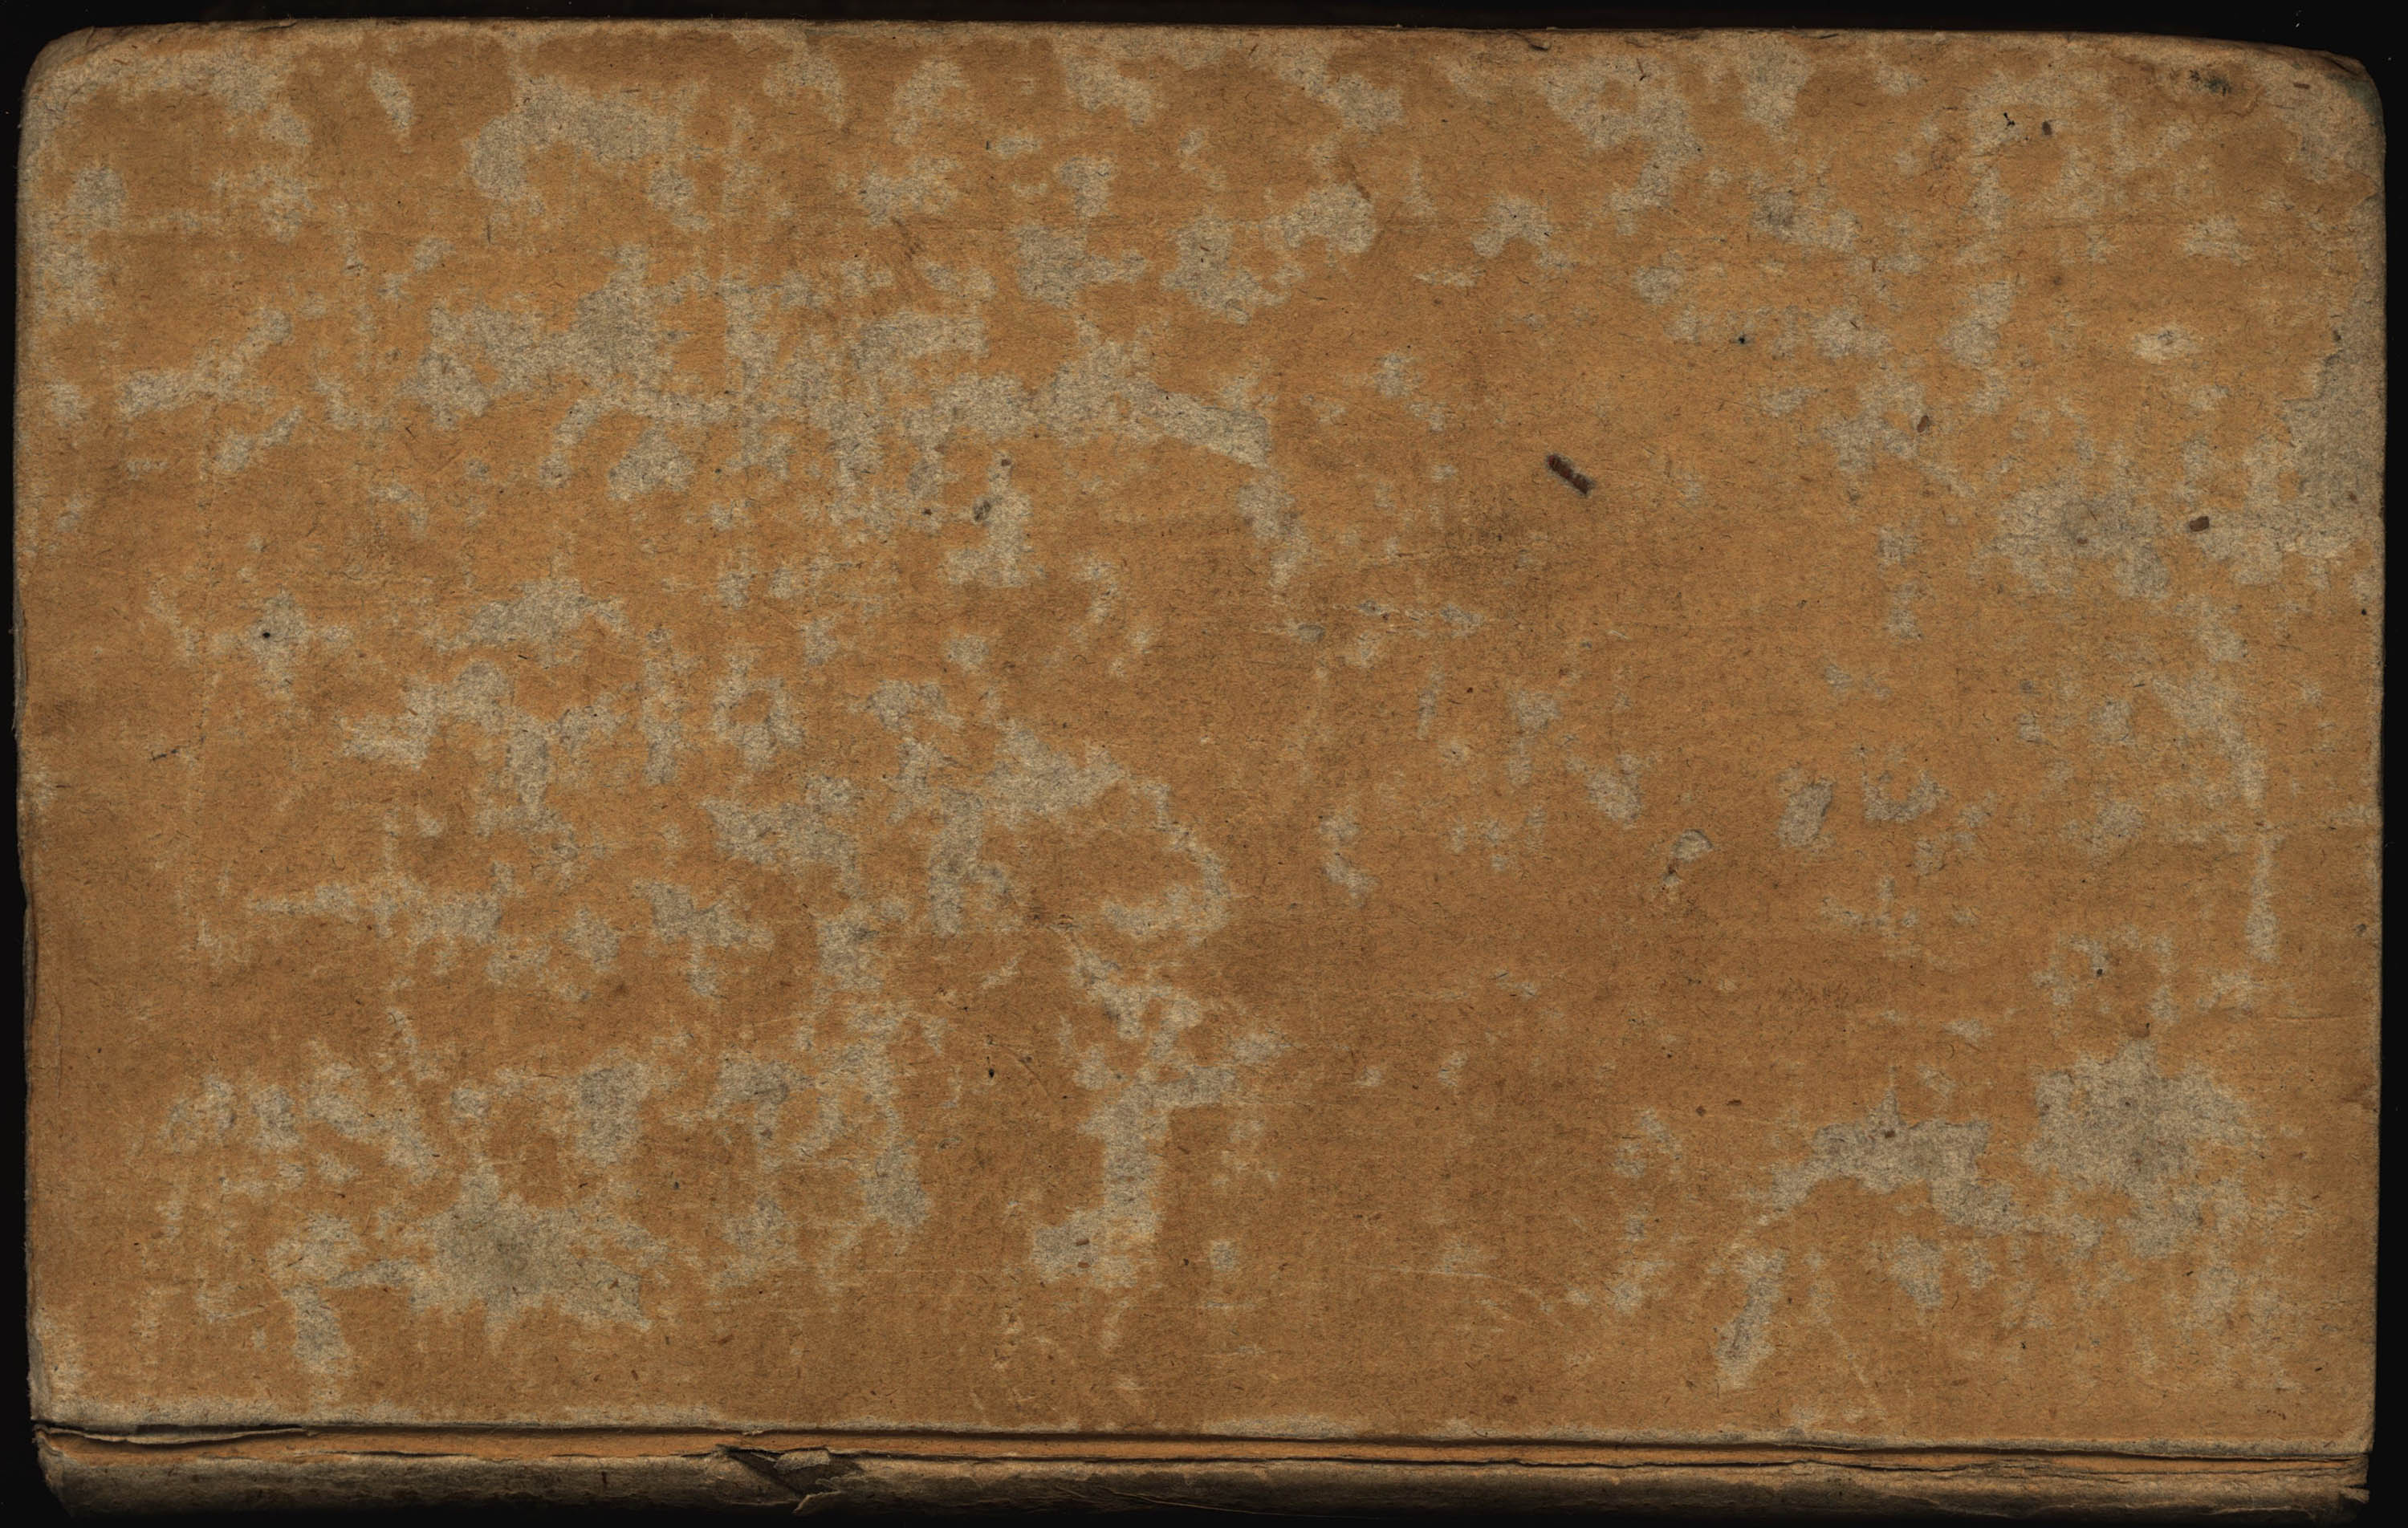 7 Vintage Paper Book Cover Texture | Textures for photoshop free